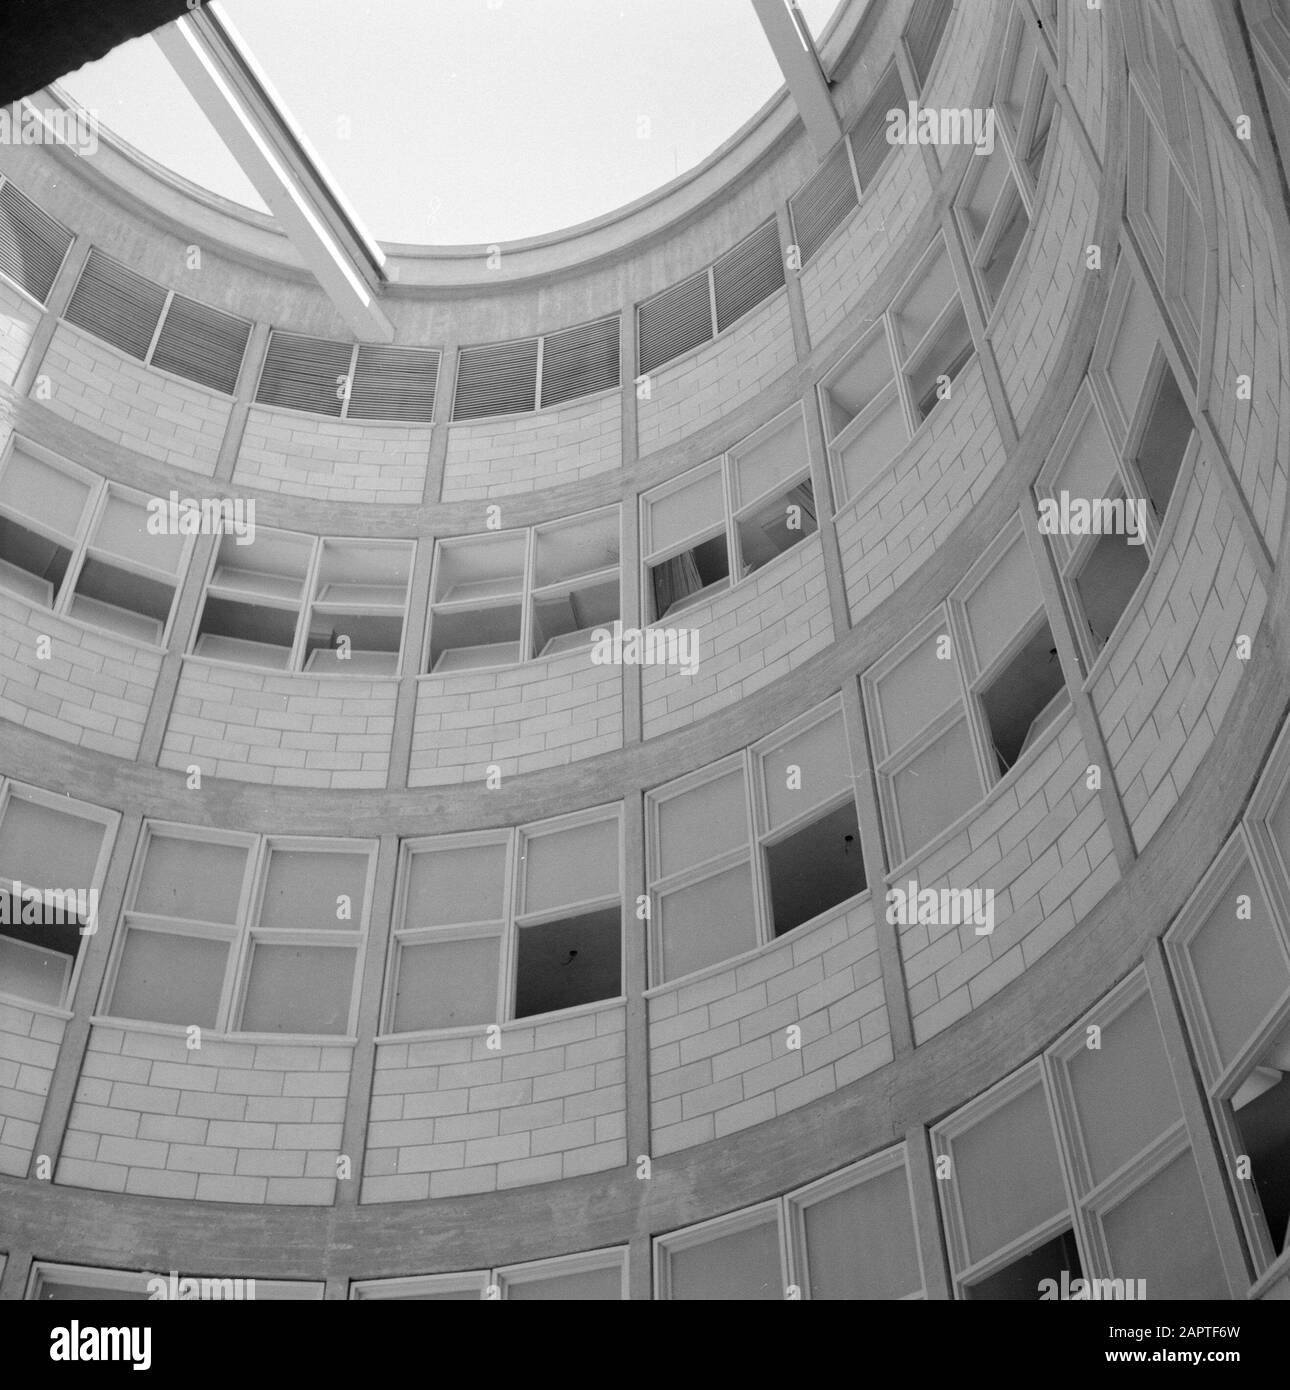 Hadassah universistair medical center. Light shaft in the circular building Date: January 1, 1960 Location: Israel Keywords: architecture, windows, hospitals Stock Photo